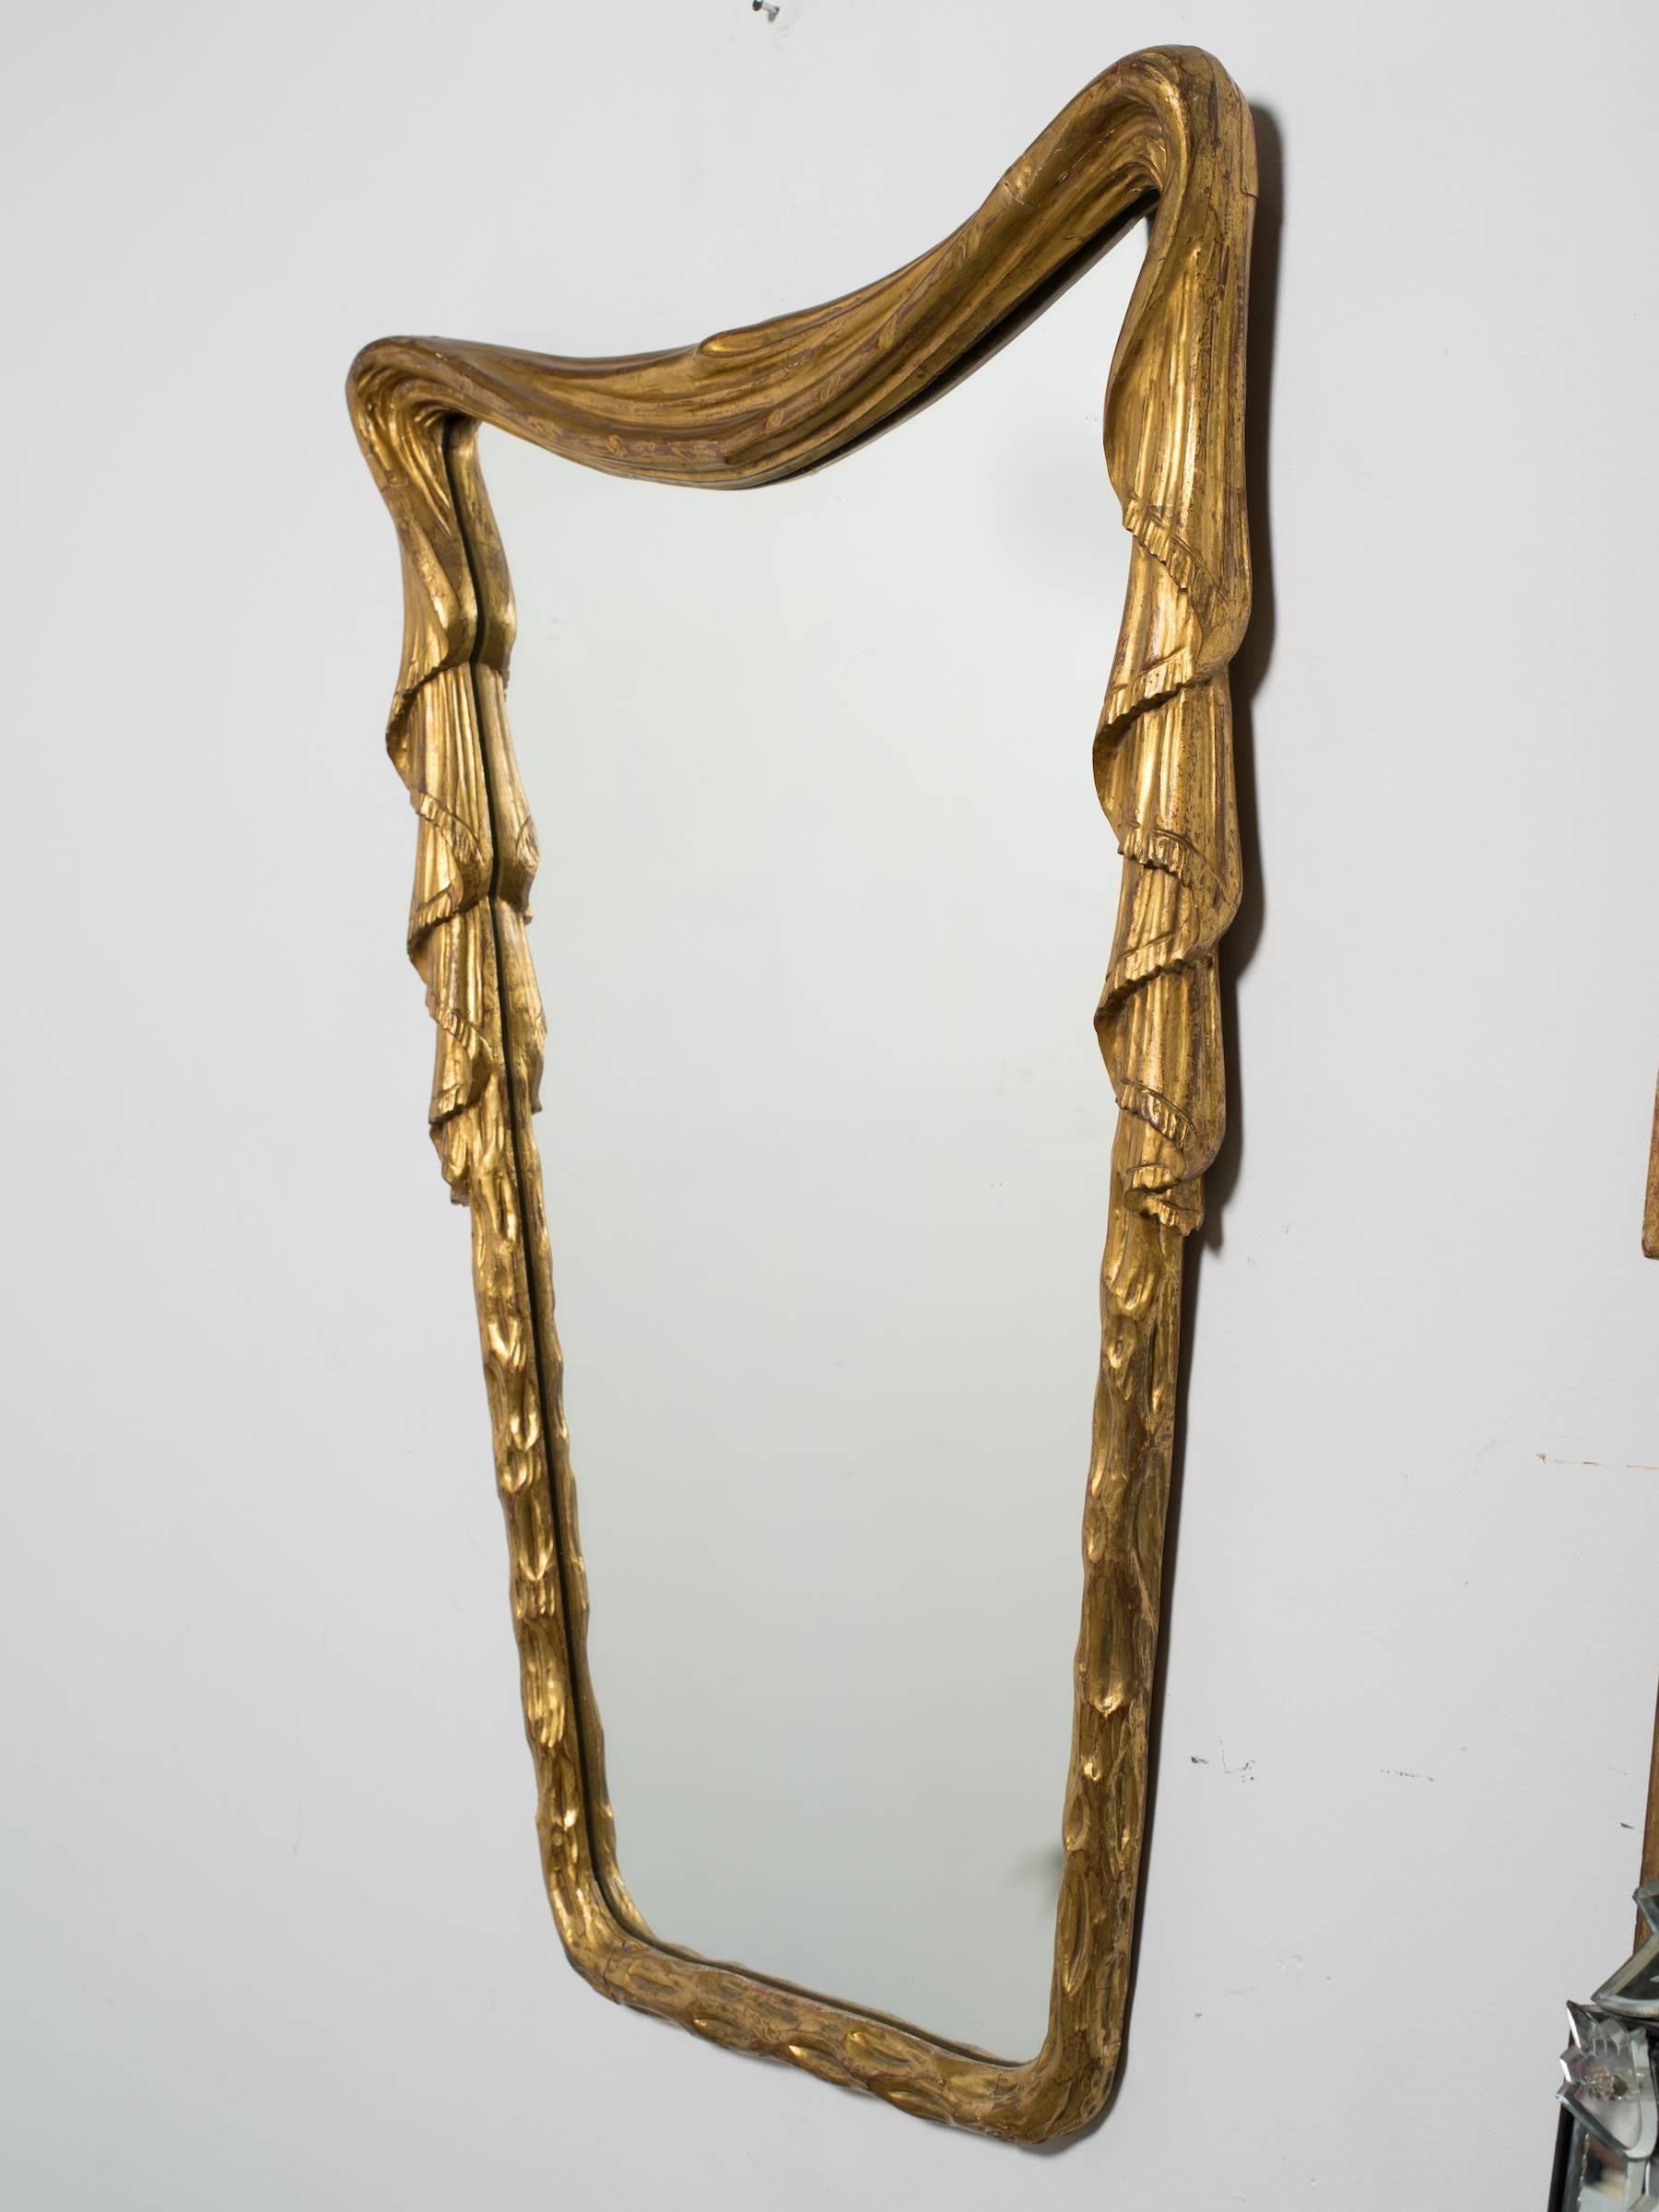 1940s Hollywood Regency carved wood draped mirror from Italy.